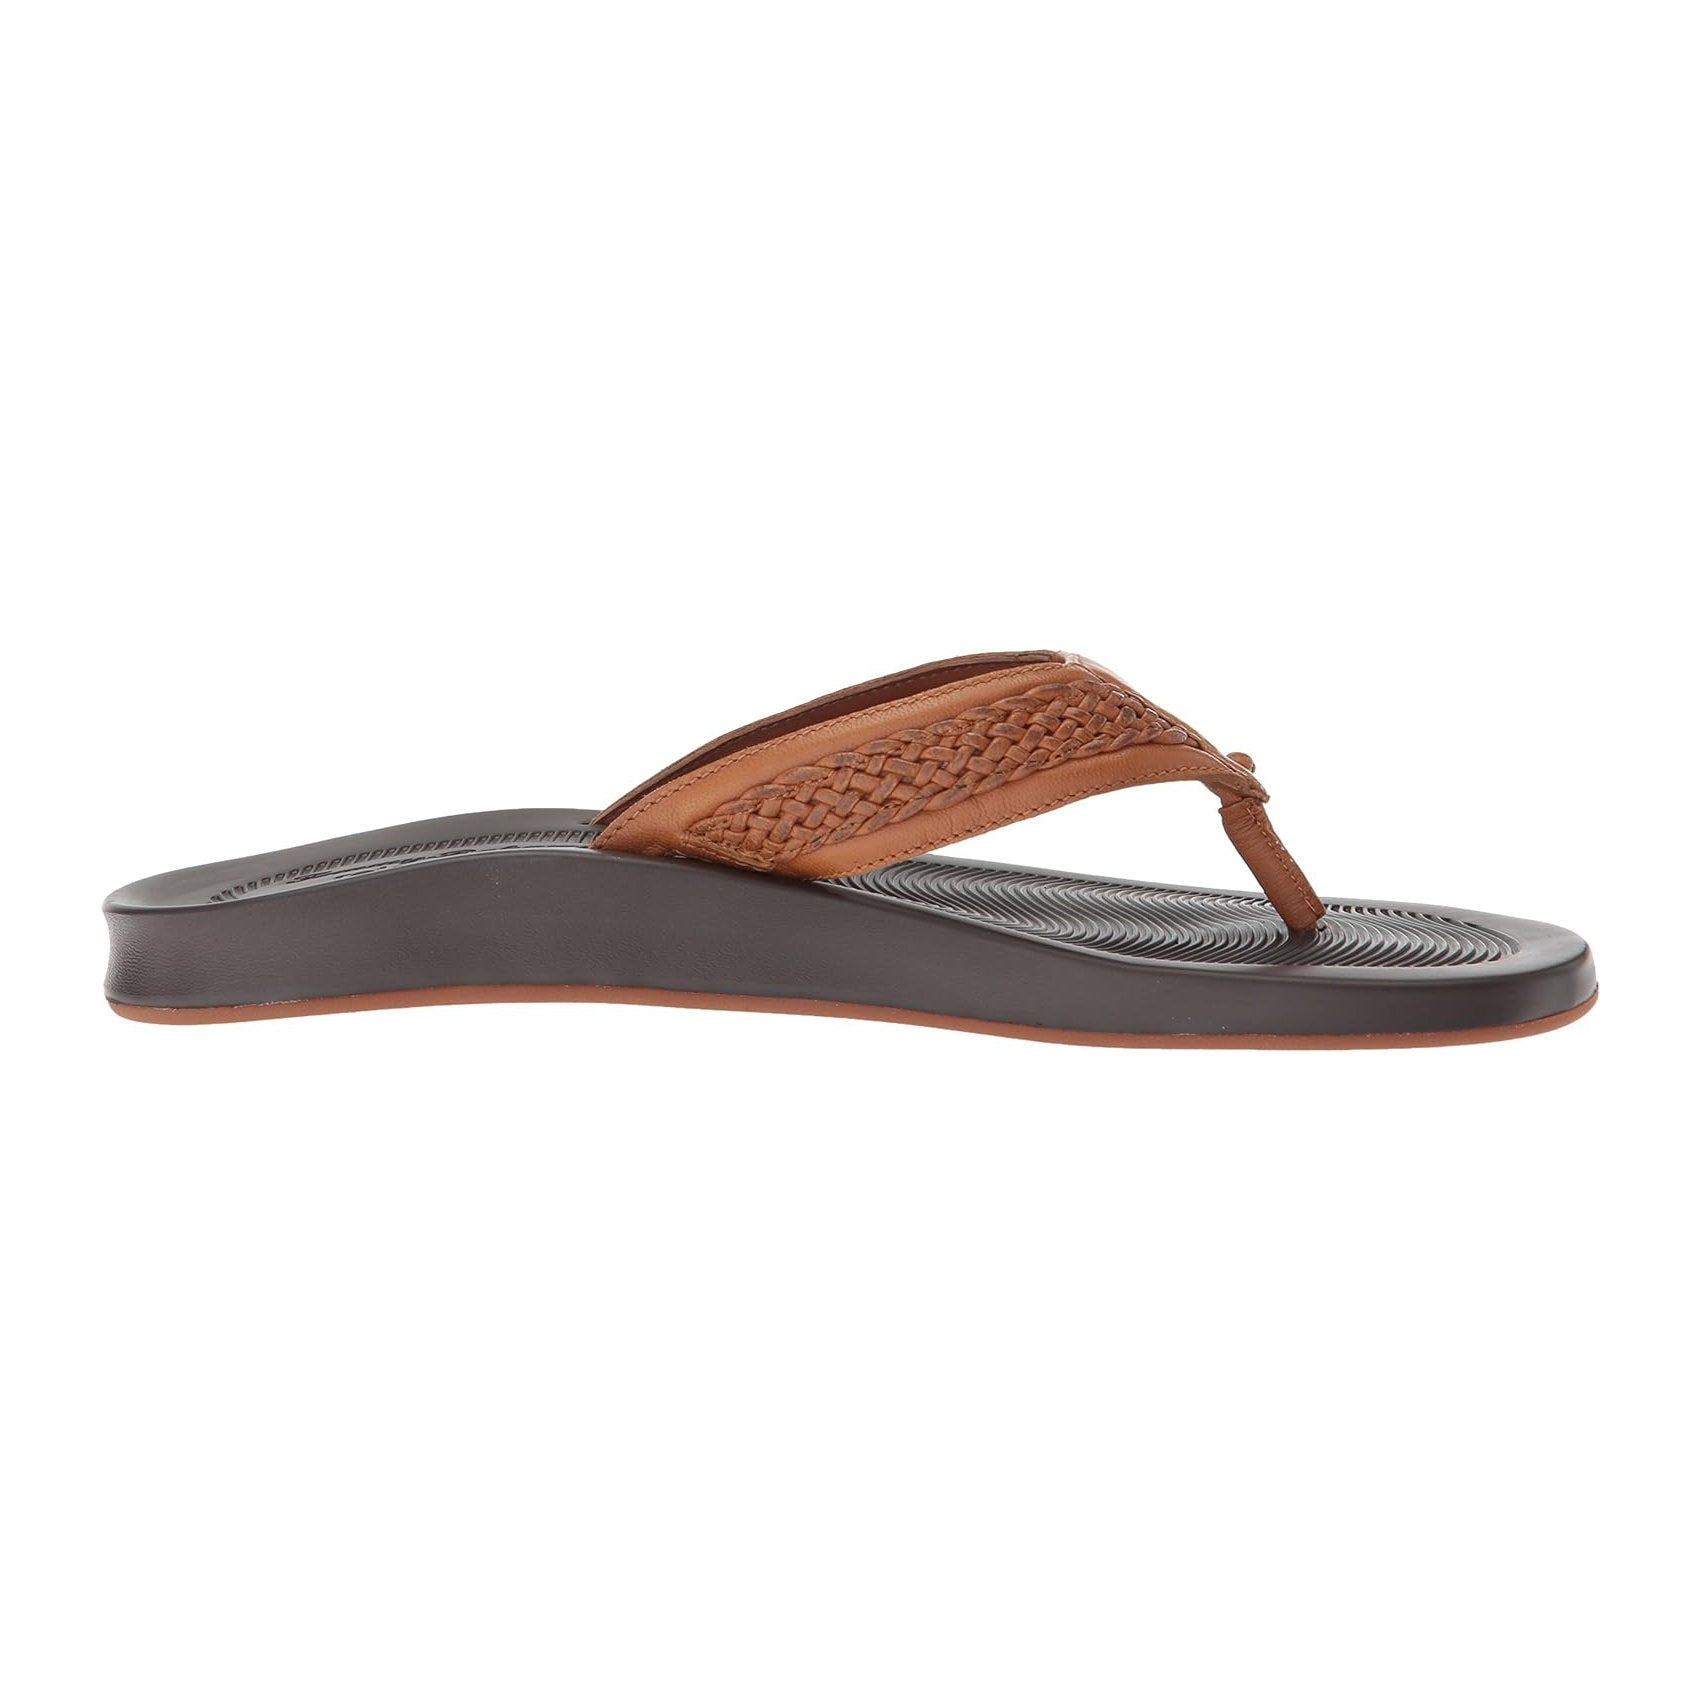 'Tommy Bahama Shallows Edge Vacation Sandals' in 'Brown' colour